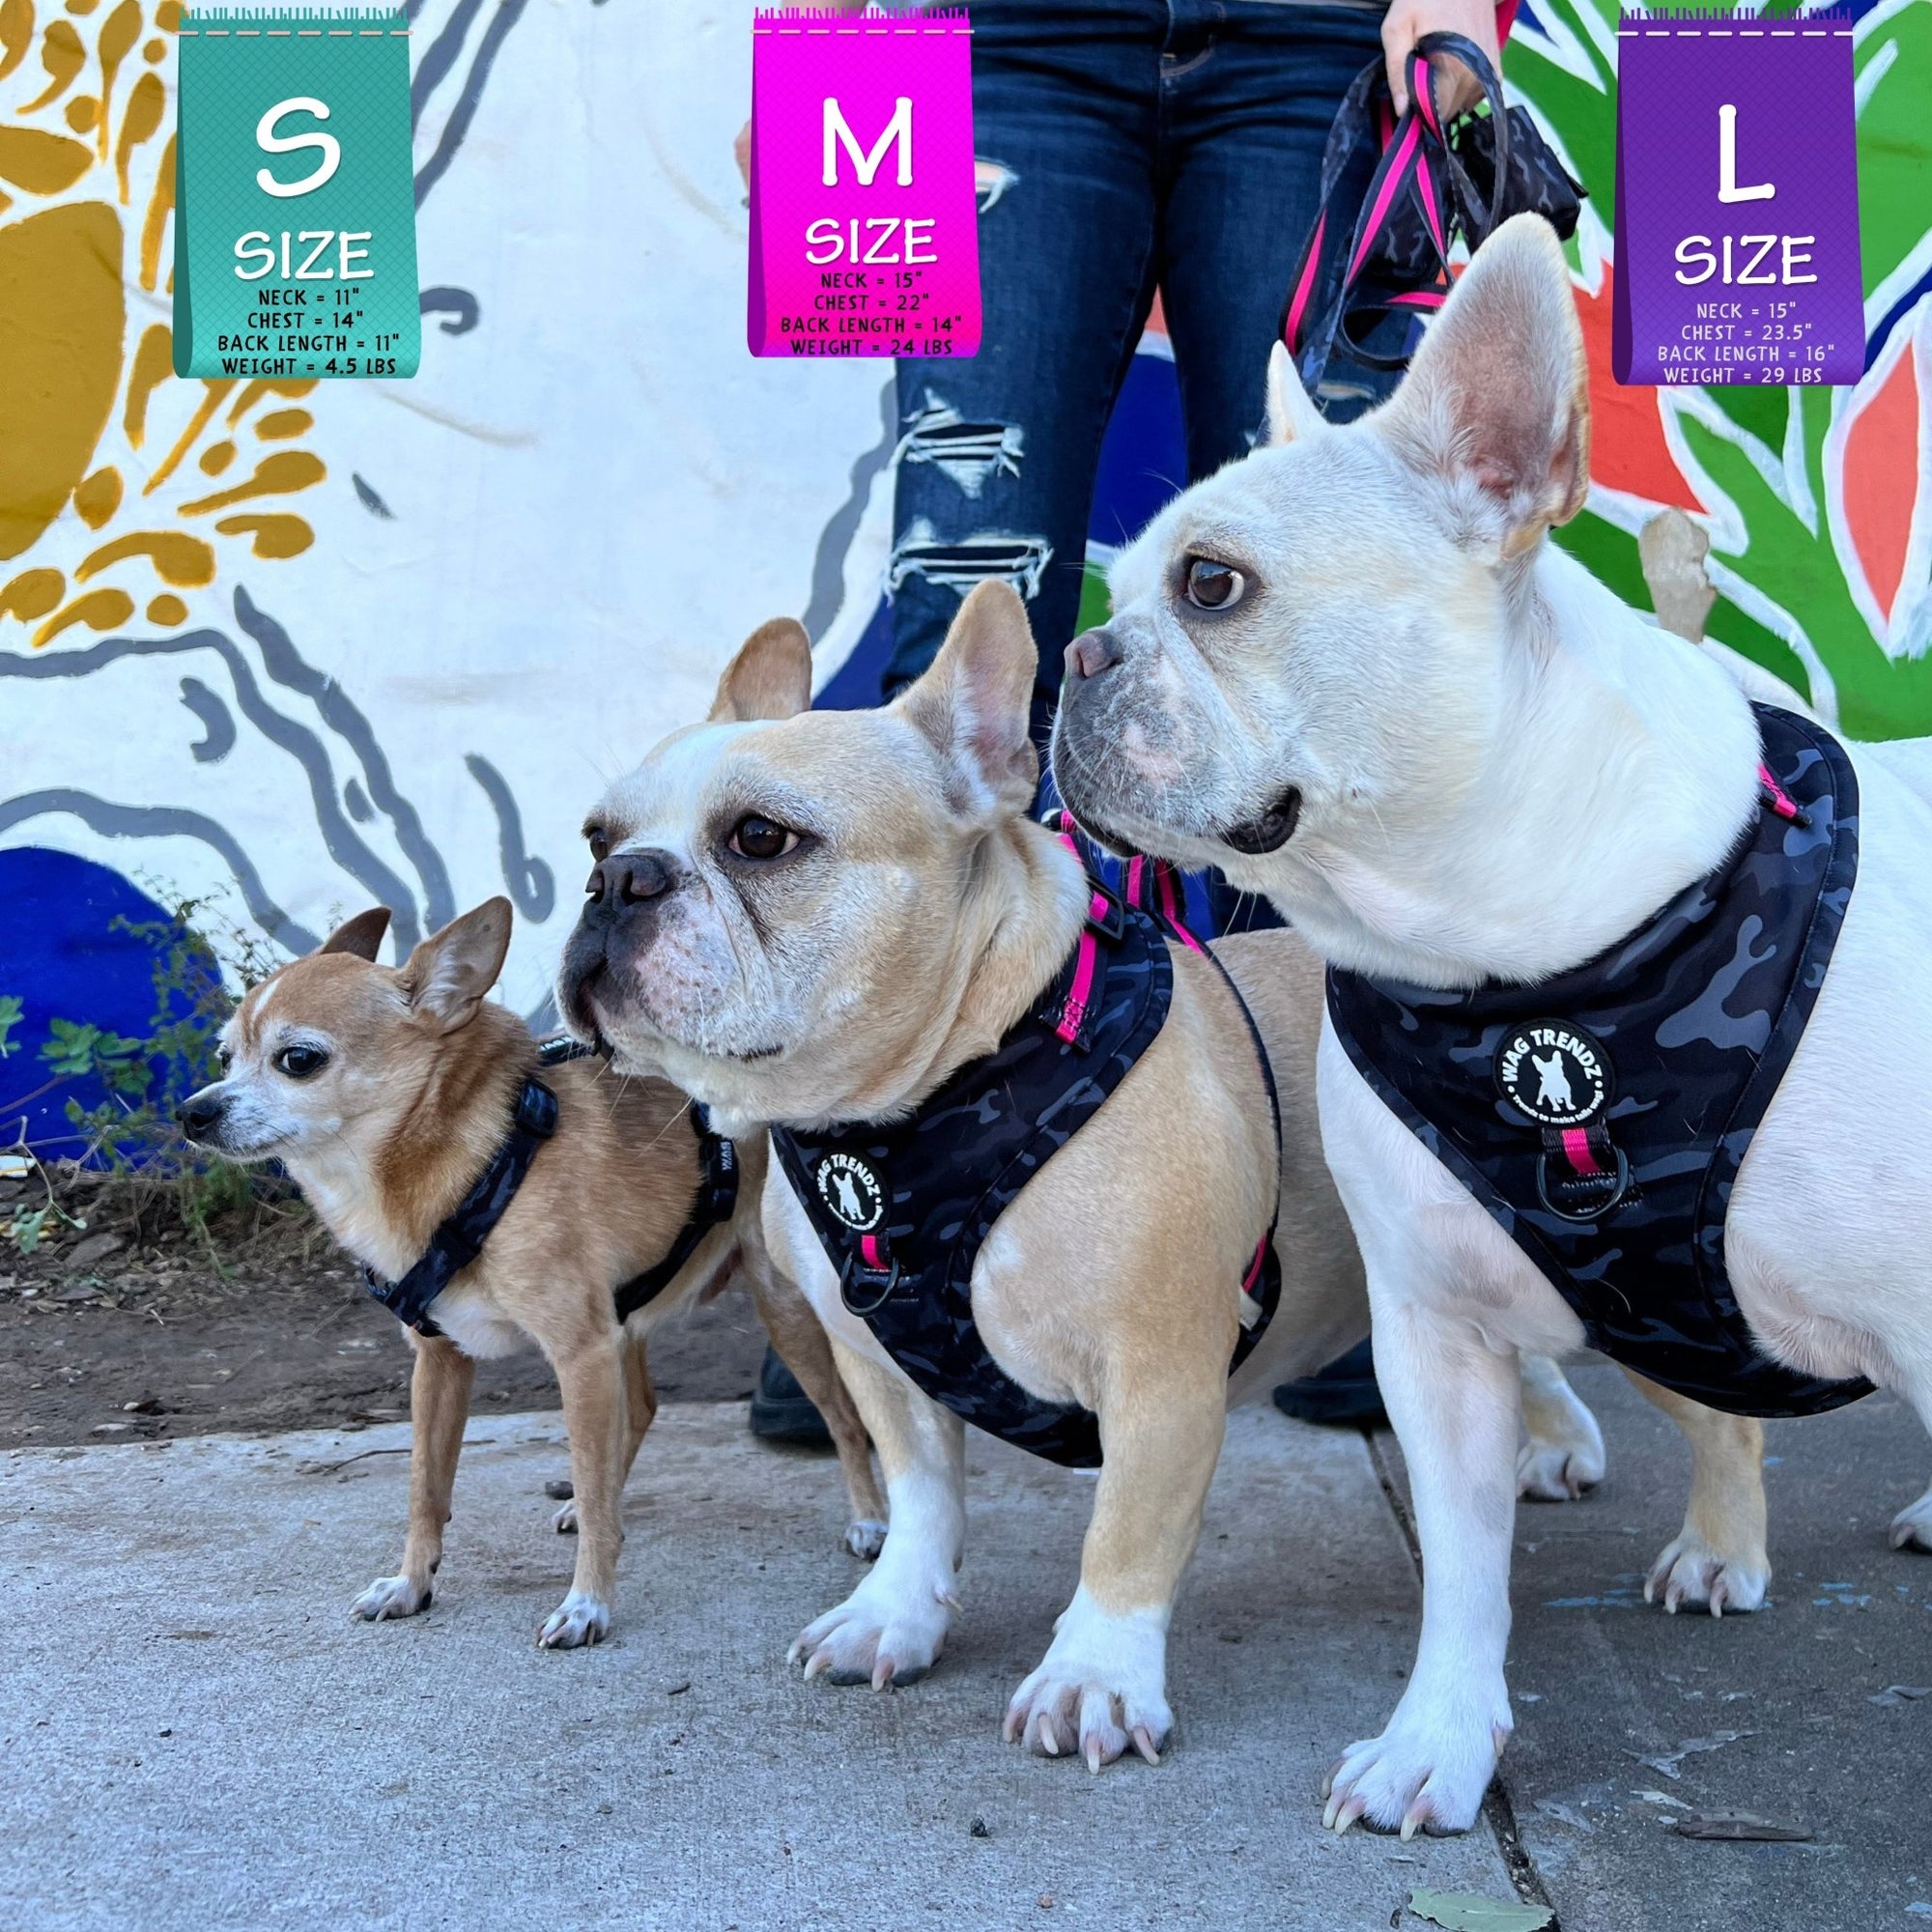 Dog Collar Harness and Leash Set - French Bulldogs and Chihuahua wearing Small, Medium and Large Dog Adjustable Harnesses with matching Dog Leashes and Poo Bag Holders in black &amp; gray camo with hot pink accents - with human and colorful Graffiti wall in background - Wag Trendz